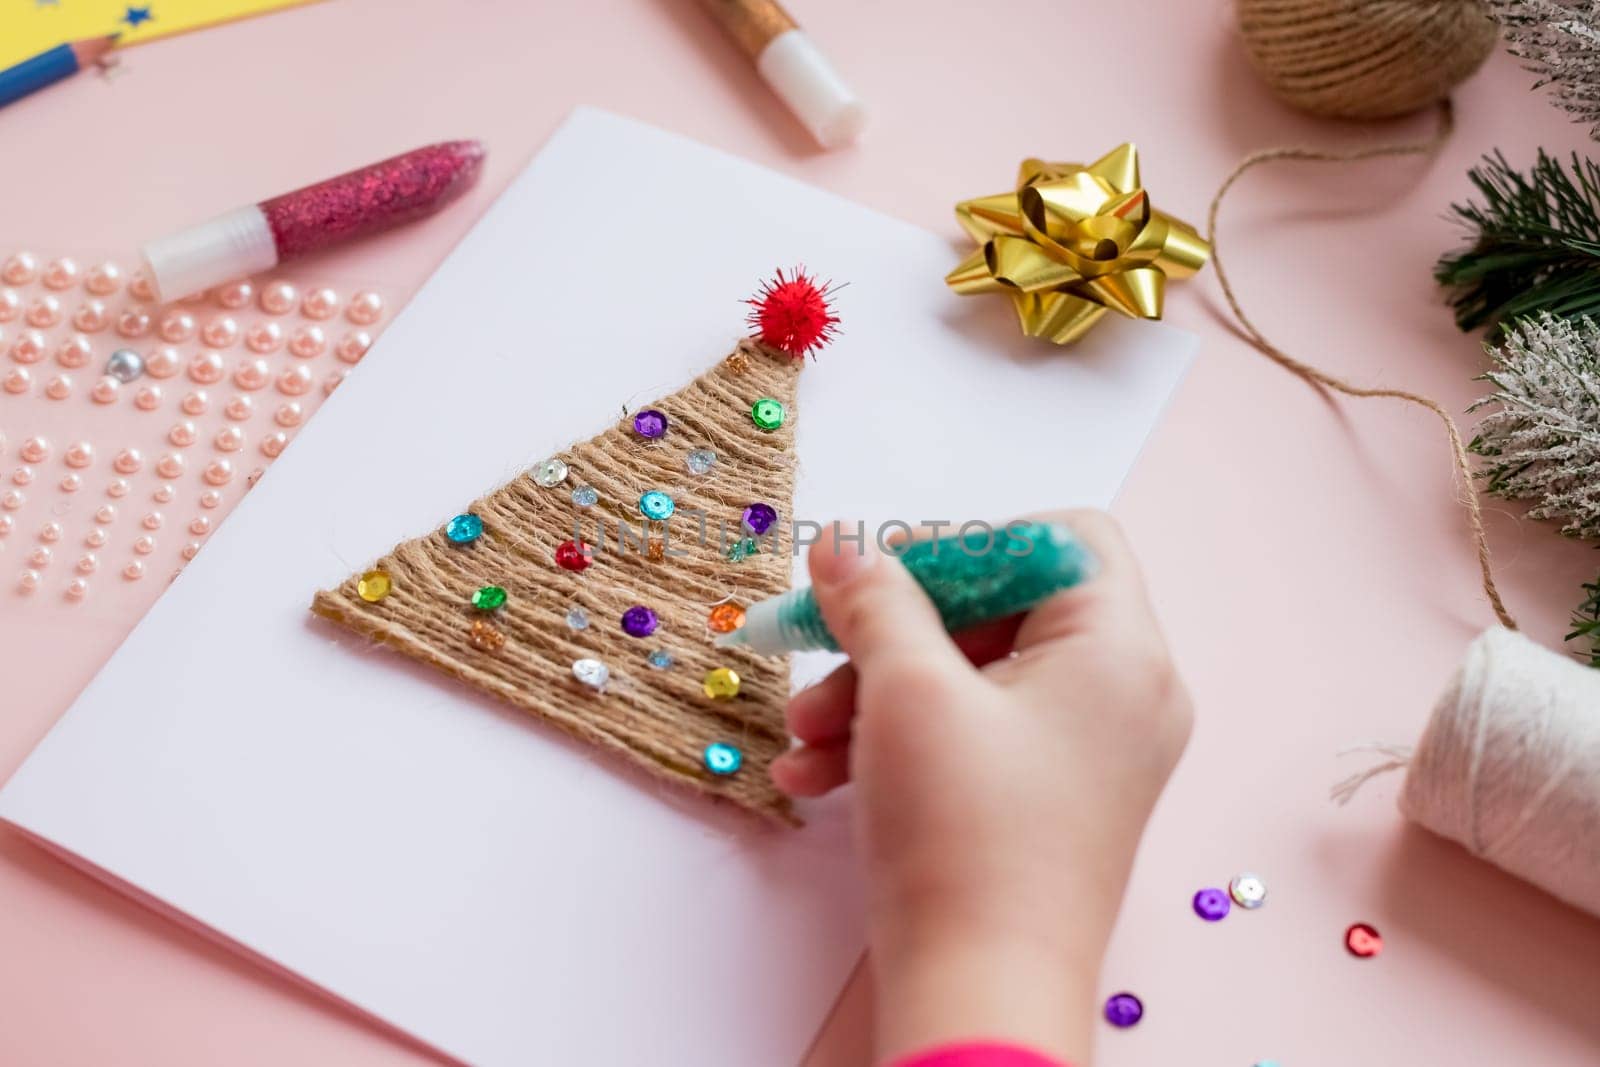 Making handmade christmas tree your own hands. Children's DIY concept. Making xmas toys decoration or greeting card.